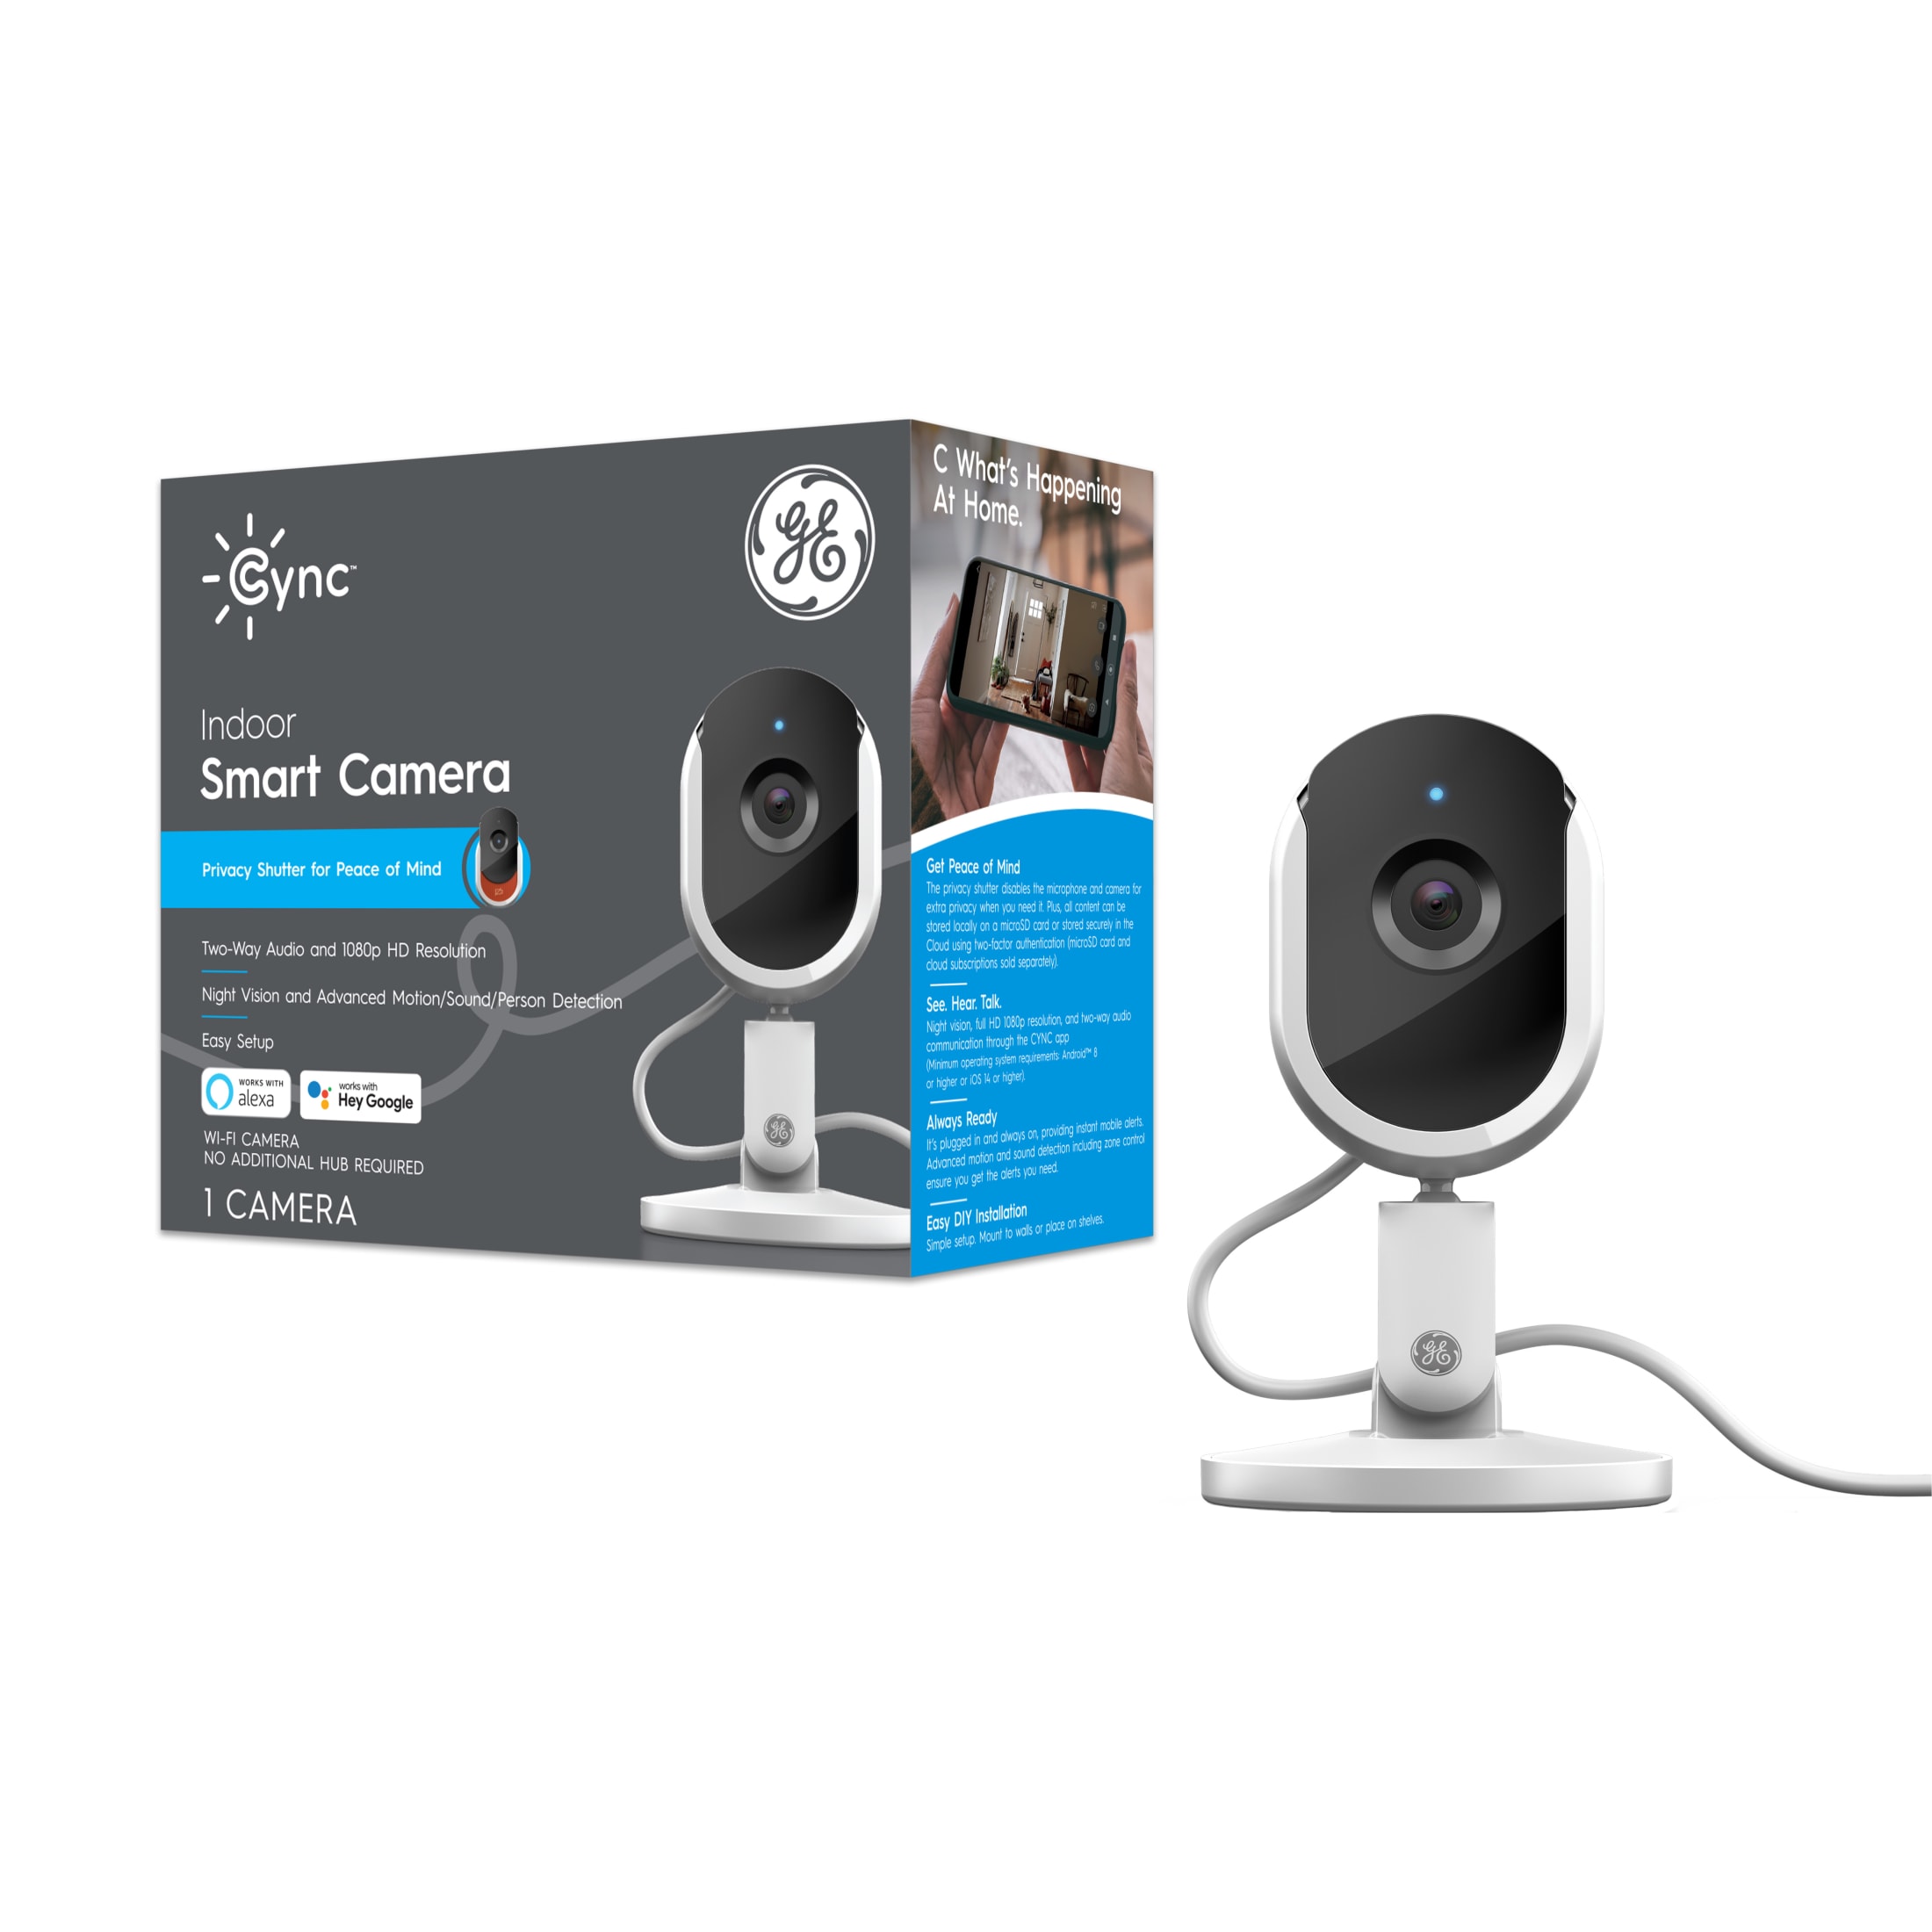 Ge Cync Smart Indoor Security Camera with Night Vision, Baby Monitor, 1080p Resolution, 1pk, White